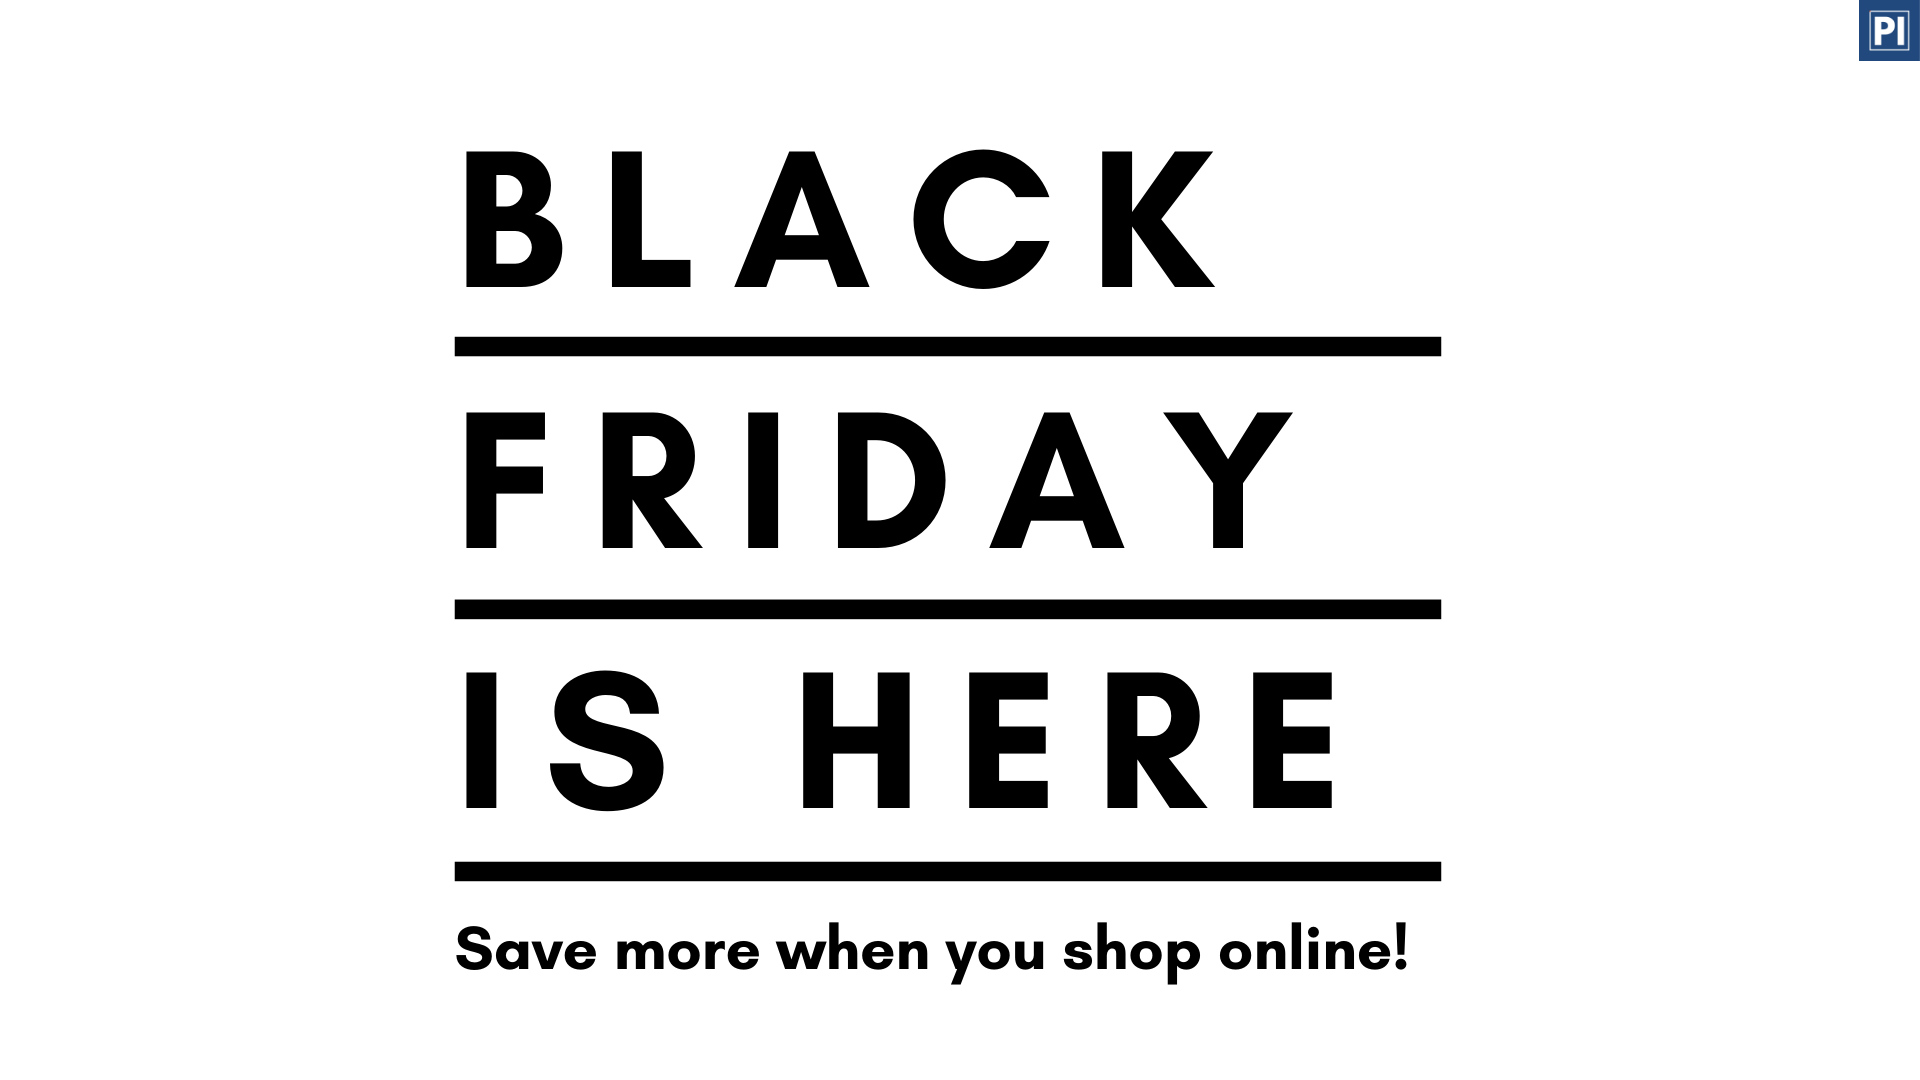 Black Friday / Cyber Monday 2019 Deals: Online Learning Courses & Graphics Designing